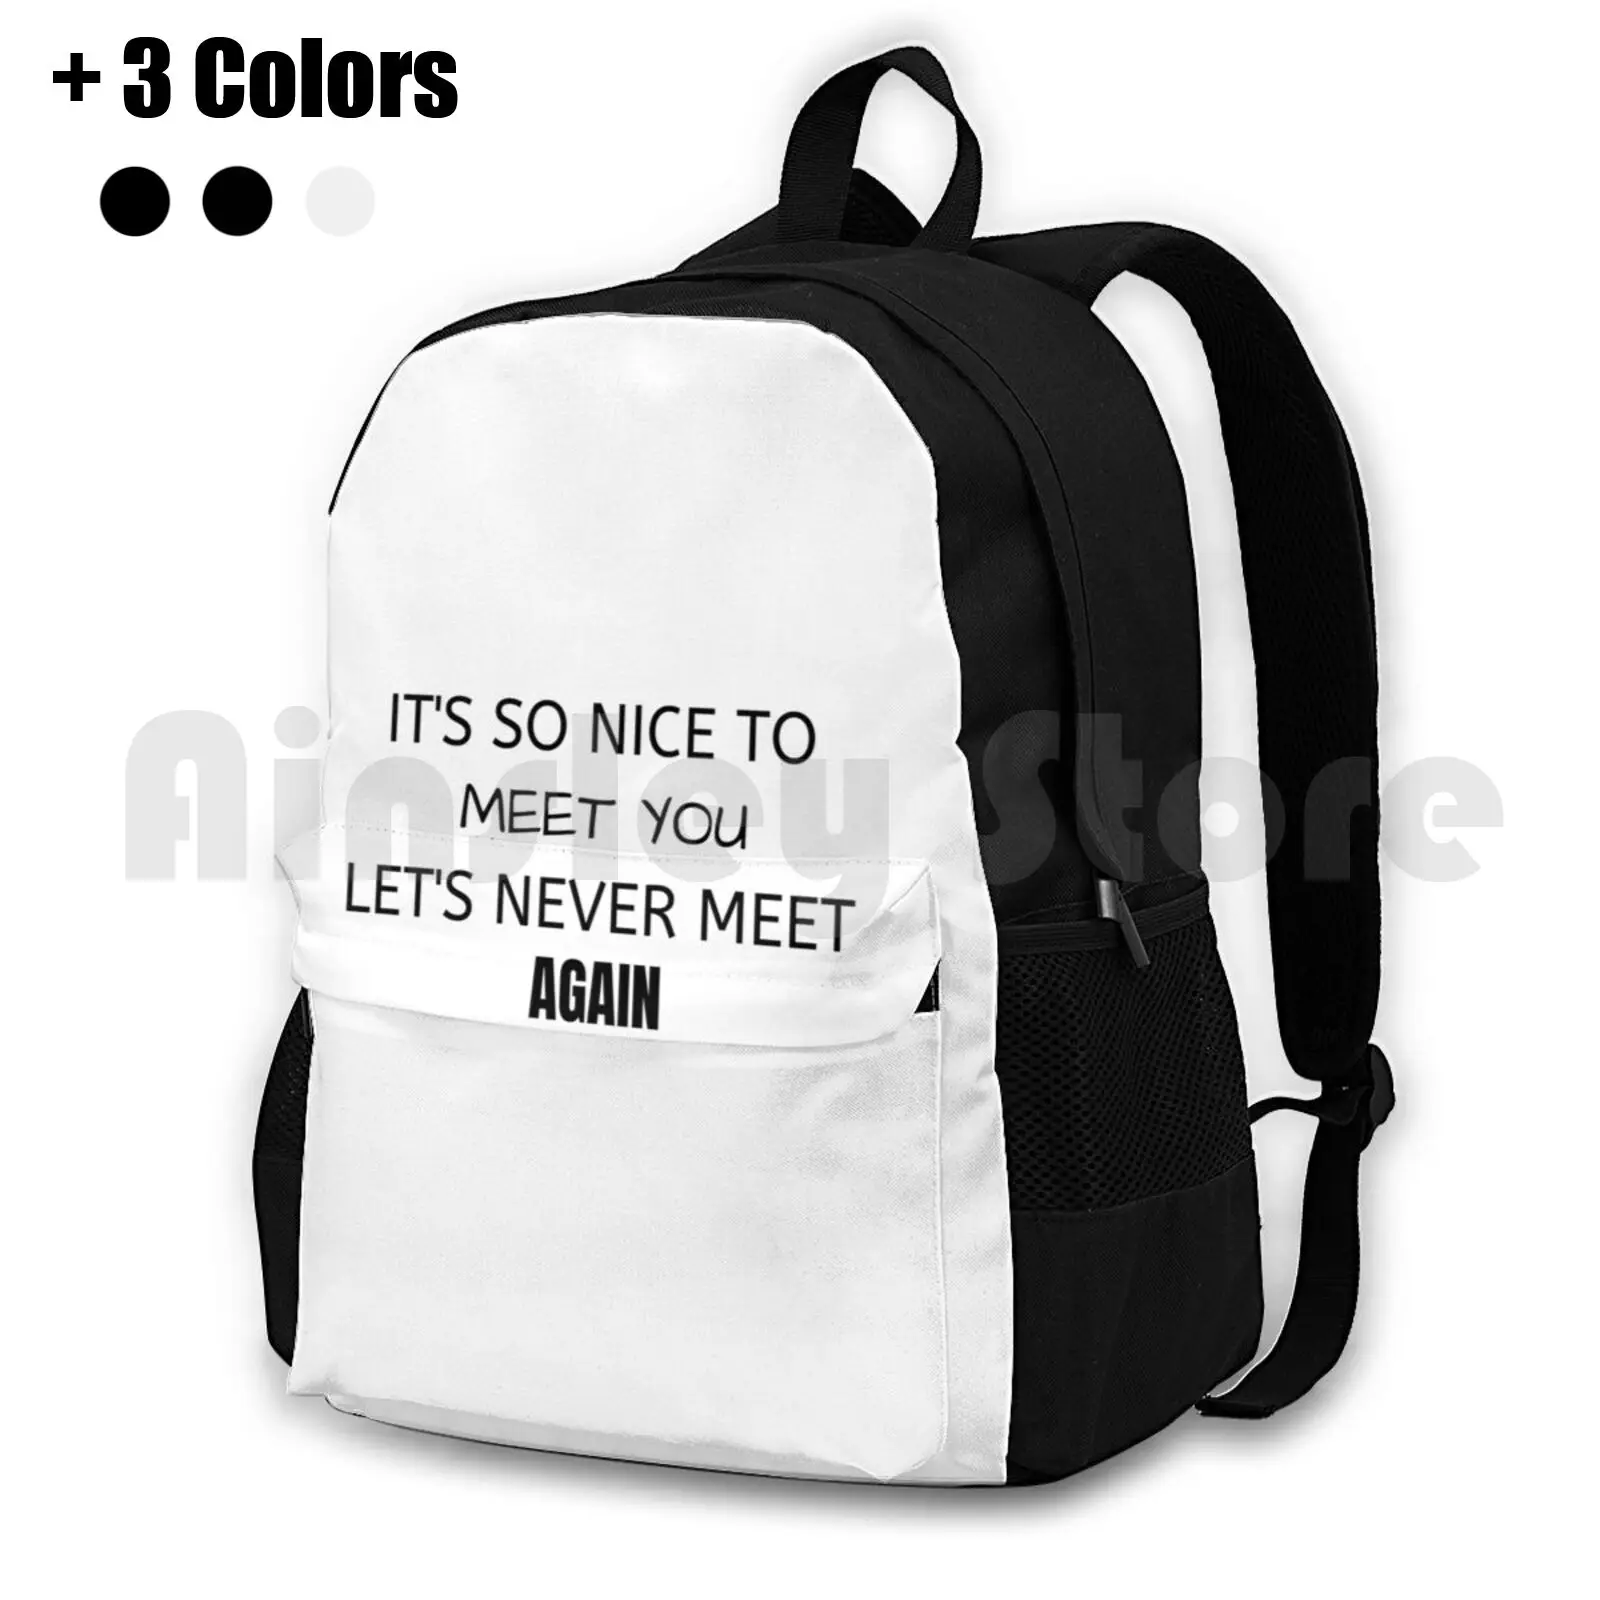 

It'S So Nice To Meet You Outdoor Hiking Backpack Riding Climbing Sports Bag Andy Black Andy Biersack Black Brides Music Lyrics